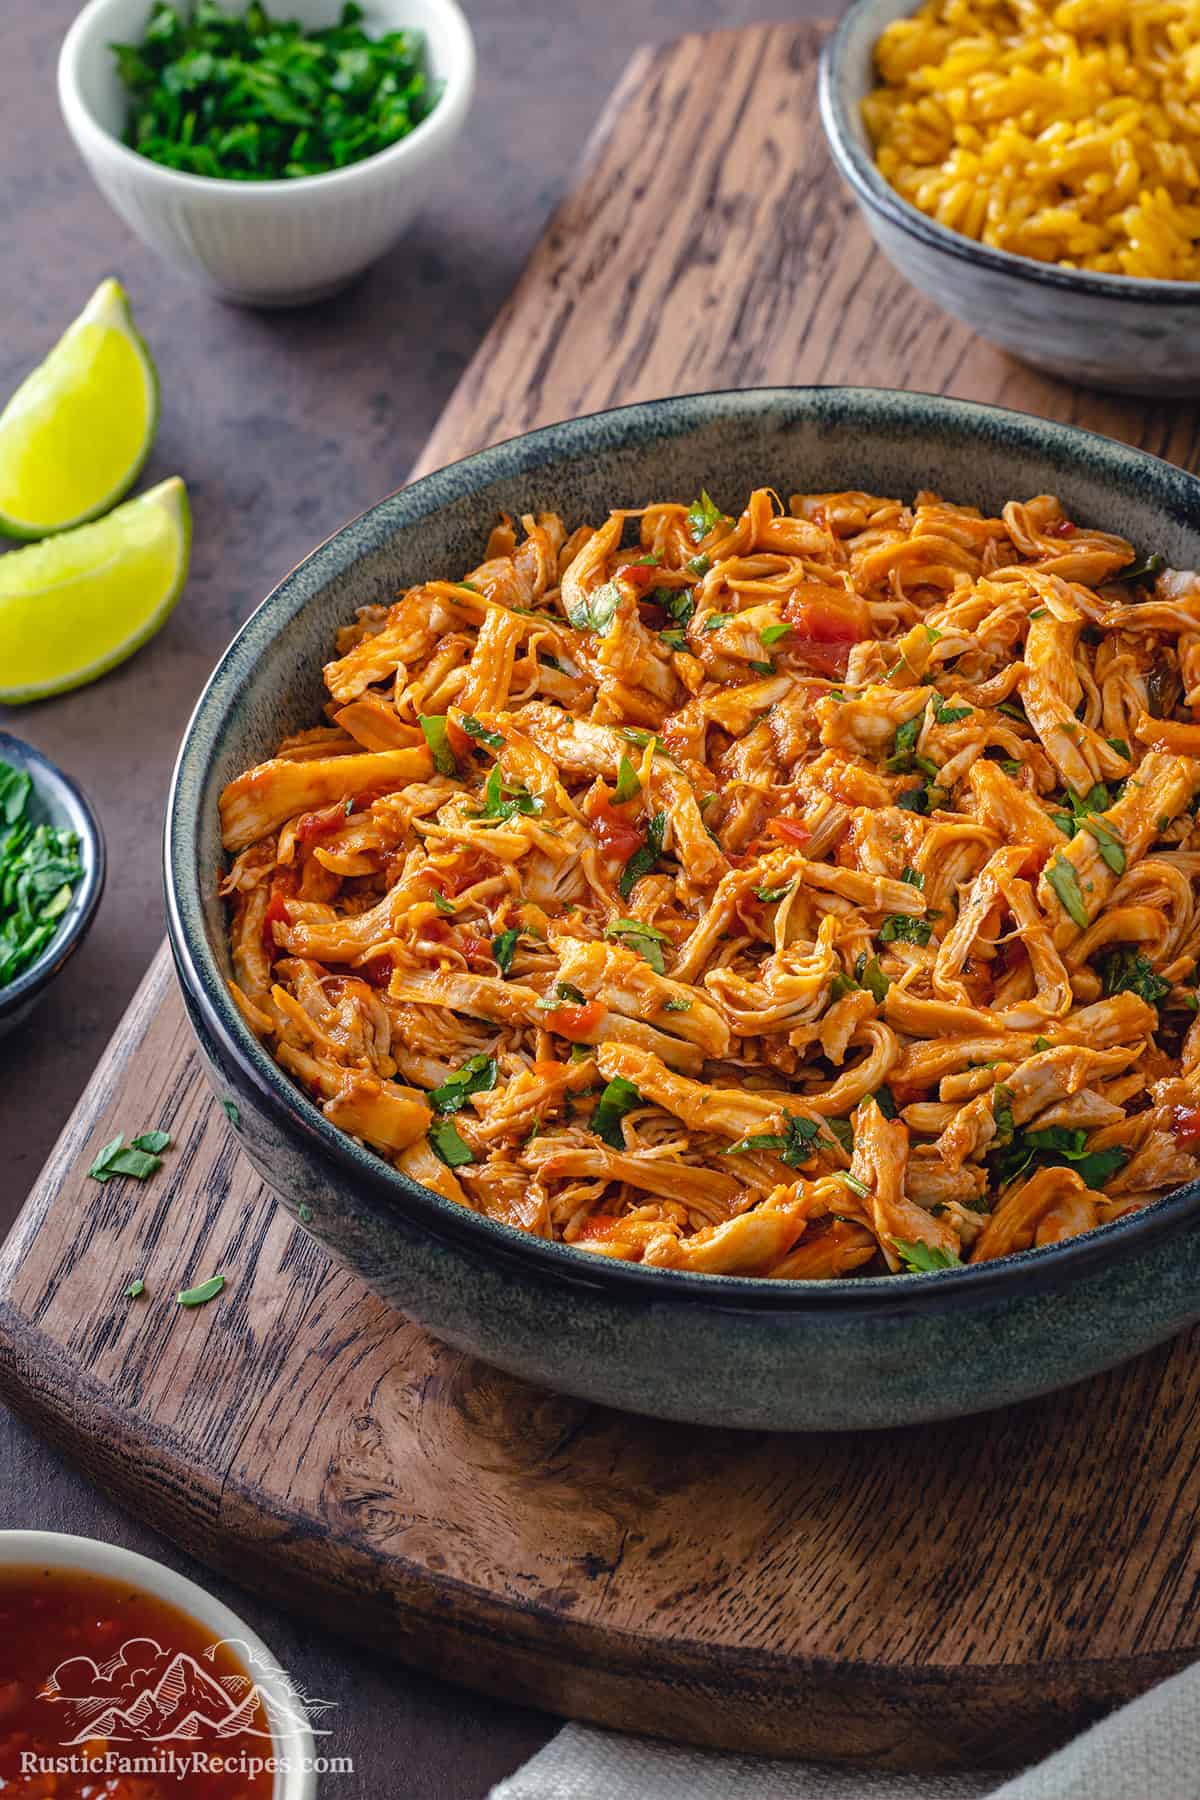 A bowl filled with salsa shredded chicken with a fork and lime wedges